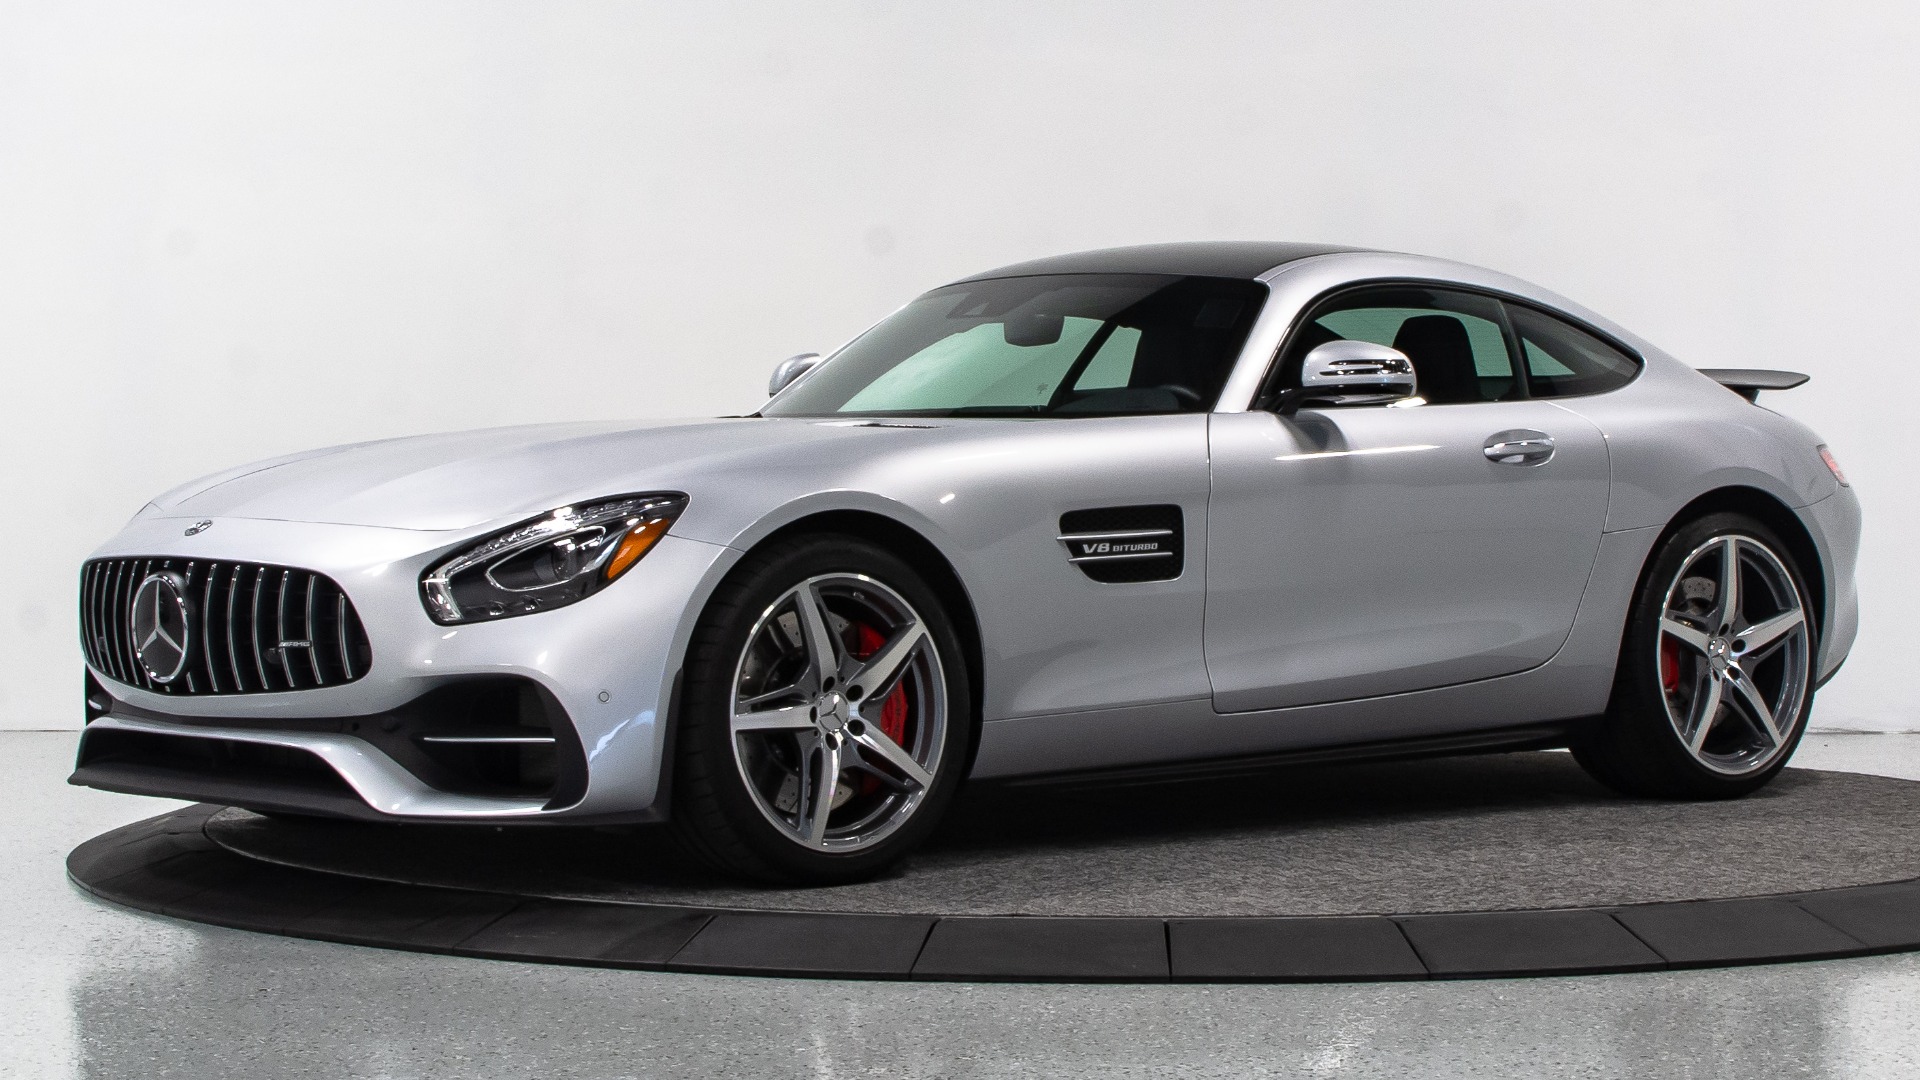 Used 2018 Mercedes-Benz AMG GT S For Sale (Sold)